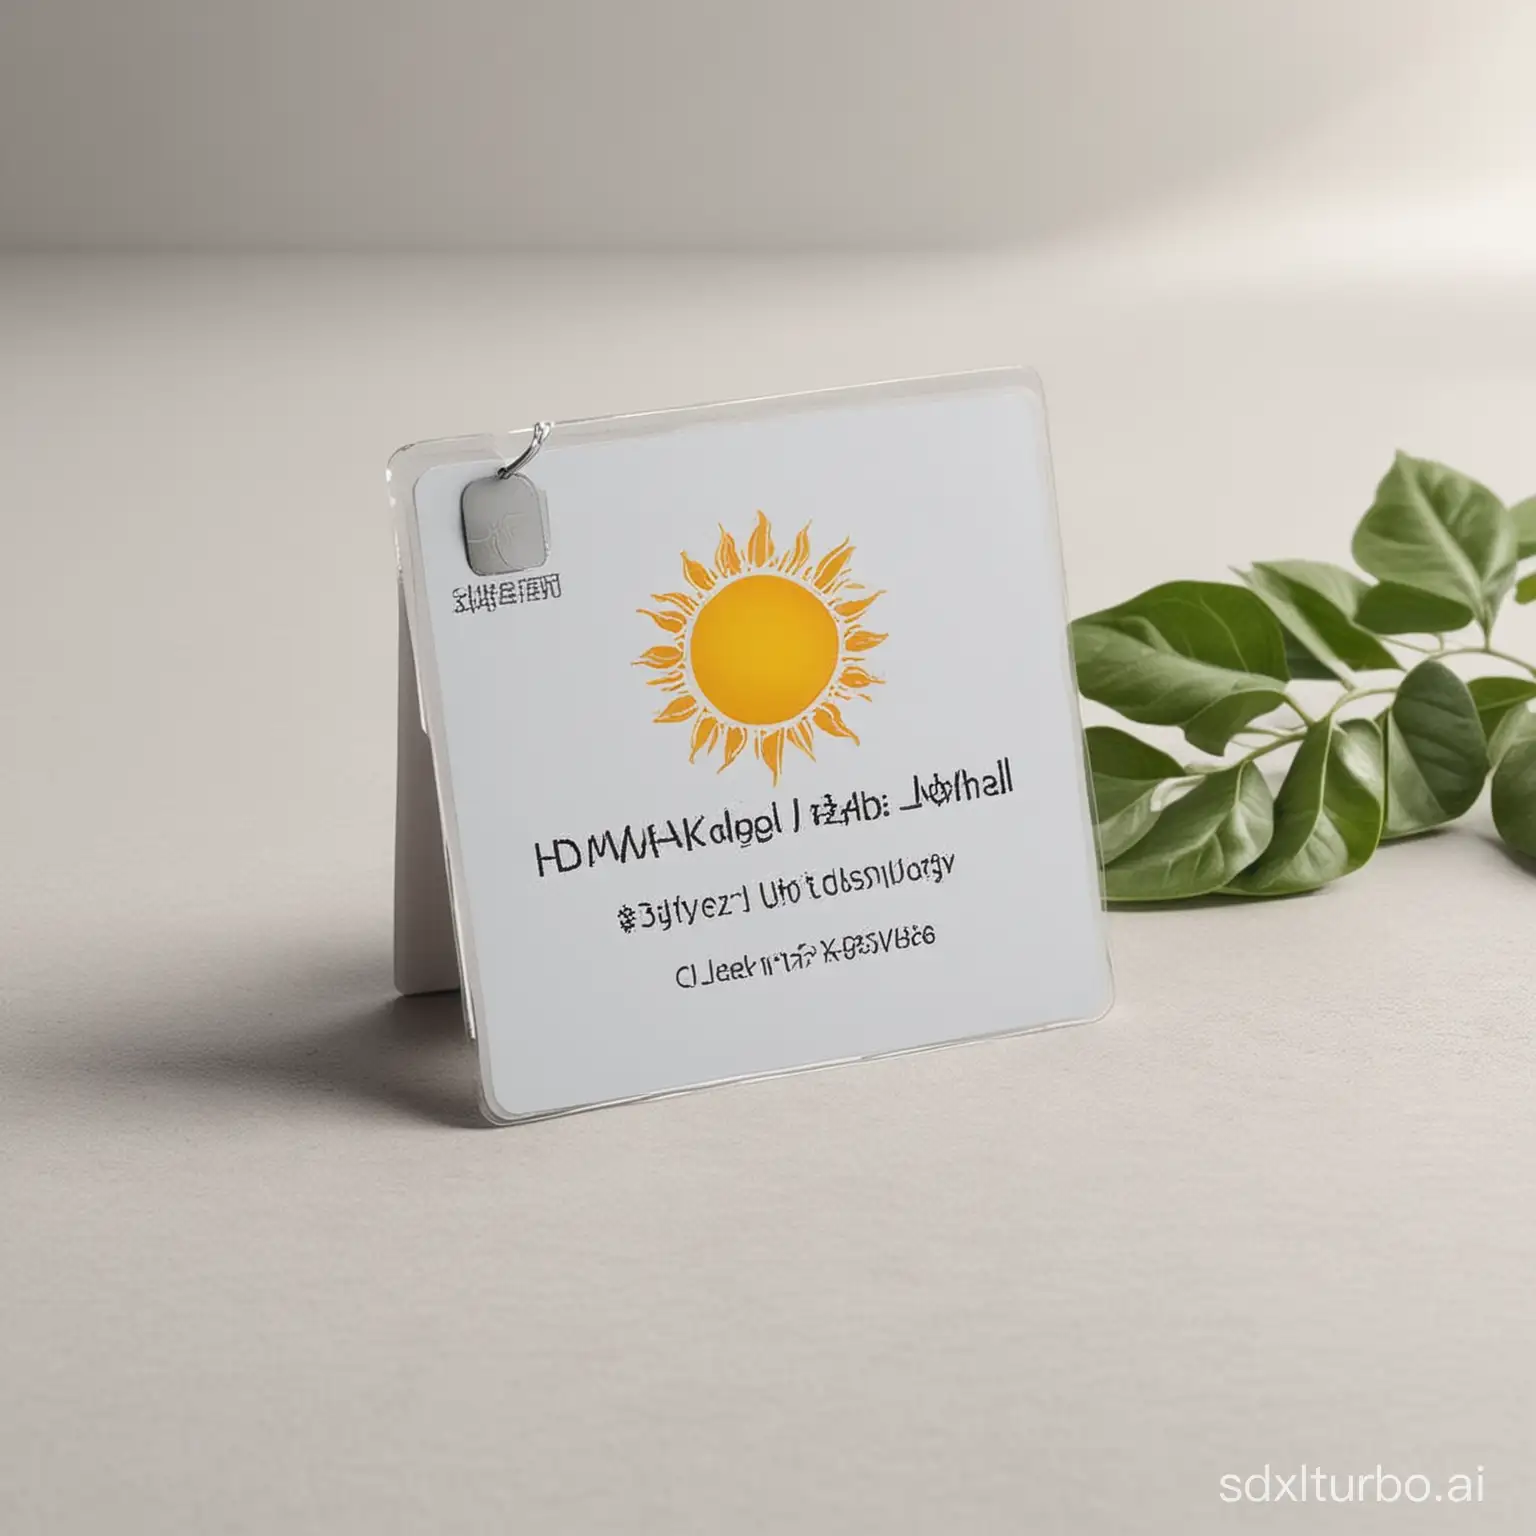 A small work ID card set is placed on a white platform with a simple background, sun, leaves, close-up view, hdr, oc, 4k